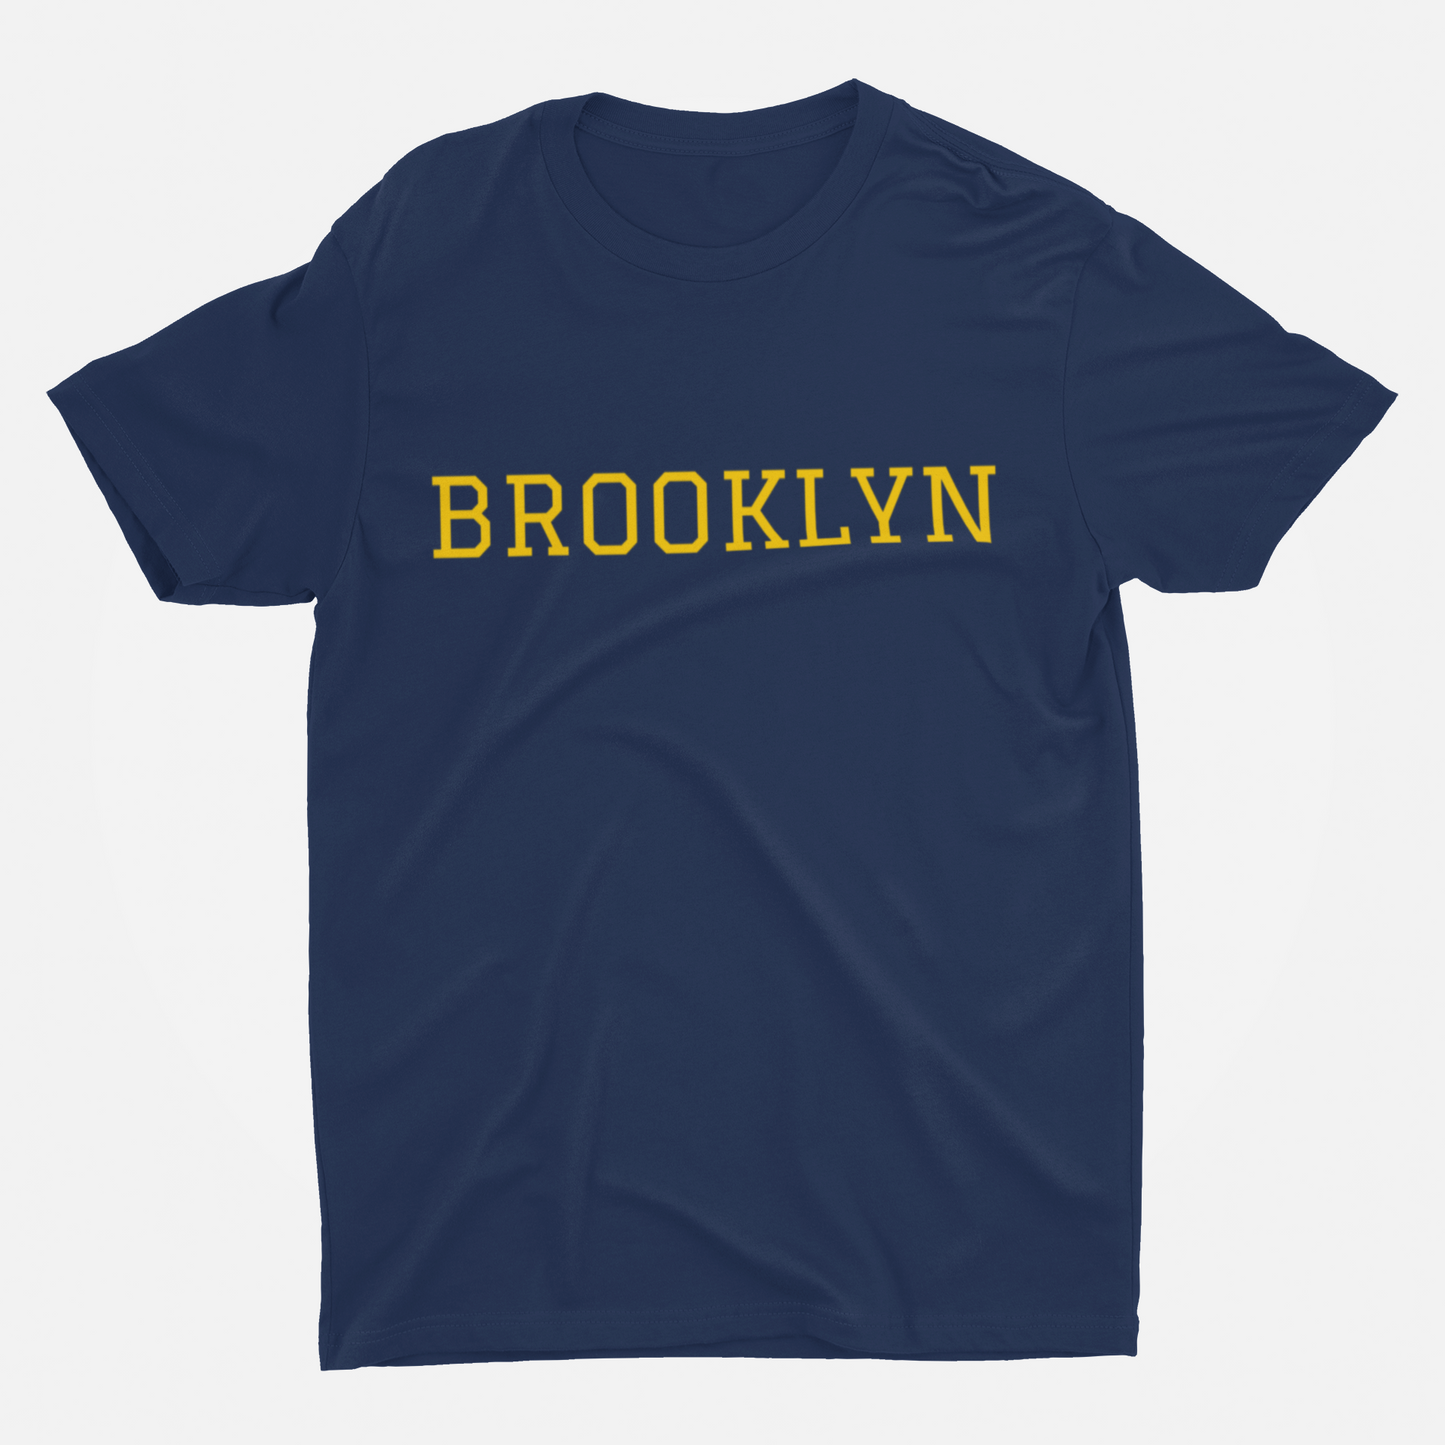 Brooklyn Yellow Font Navy Blue Round Neck T-Shirt for Men. 